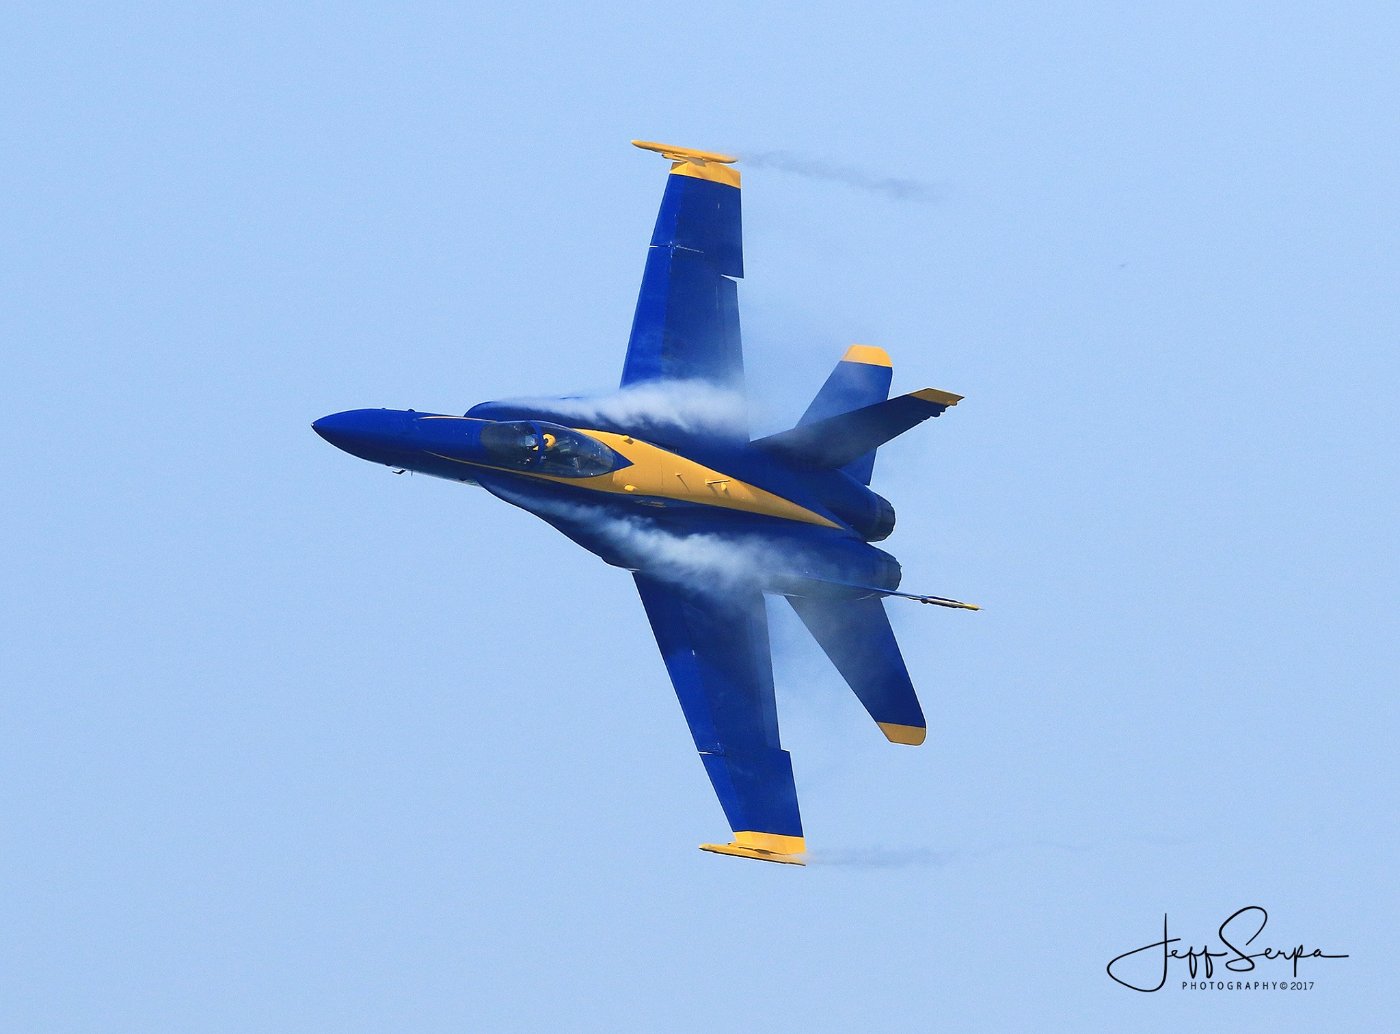 Commander Frank Weisser pulling some vapor during the Huntington Beach Airshow